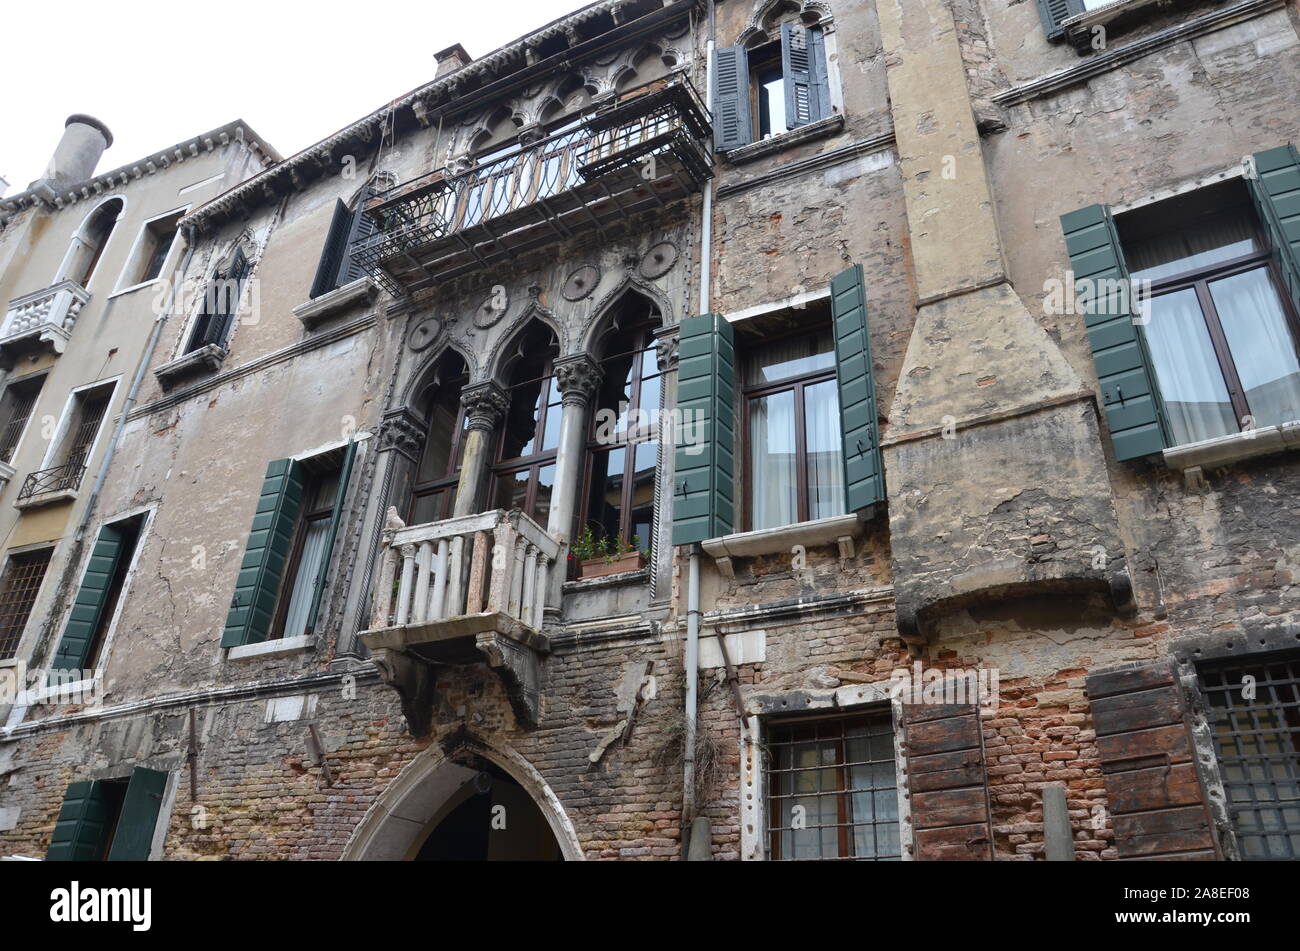 Casa Di Marco Polo High Resolution Stock Photography and Images - Alamy